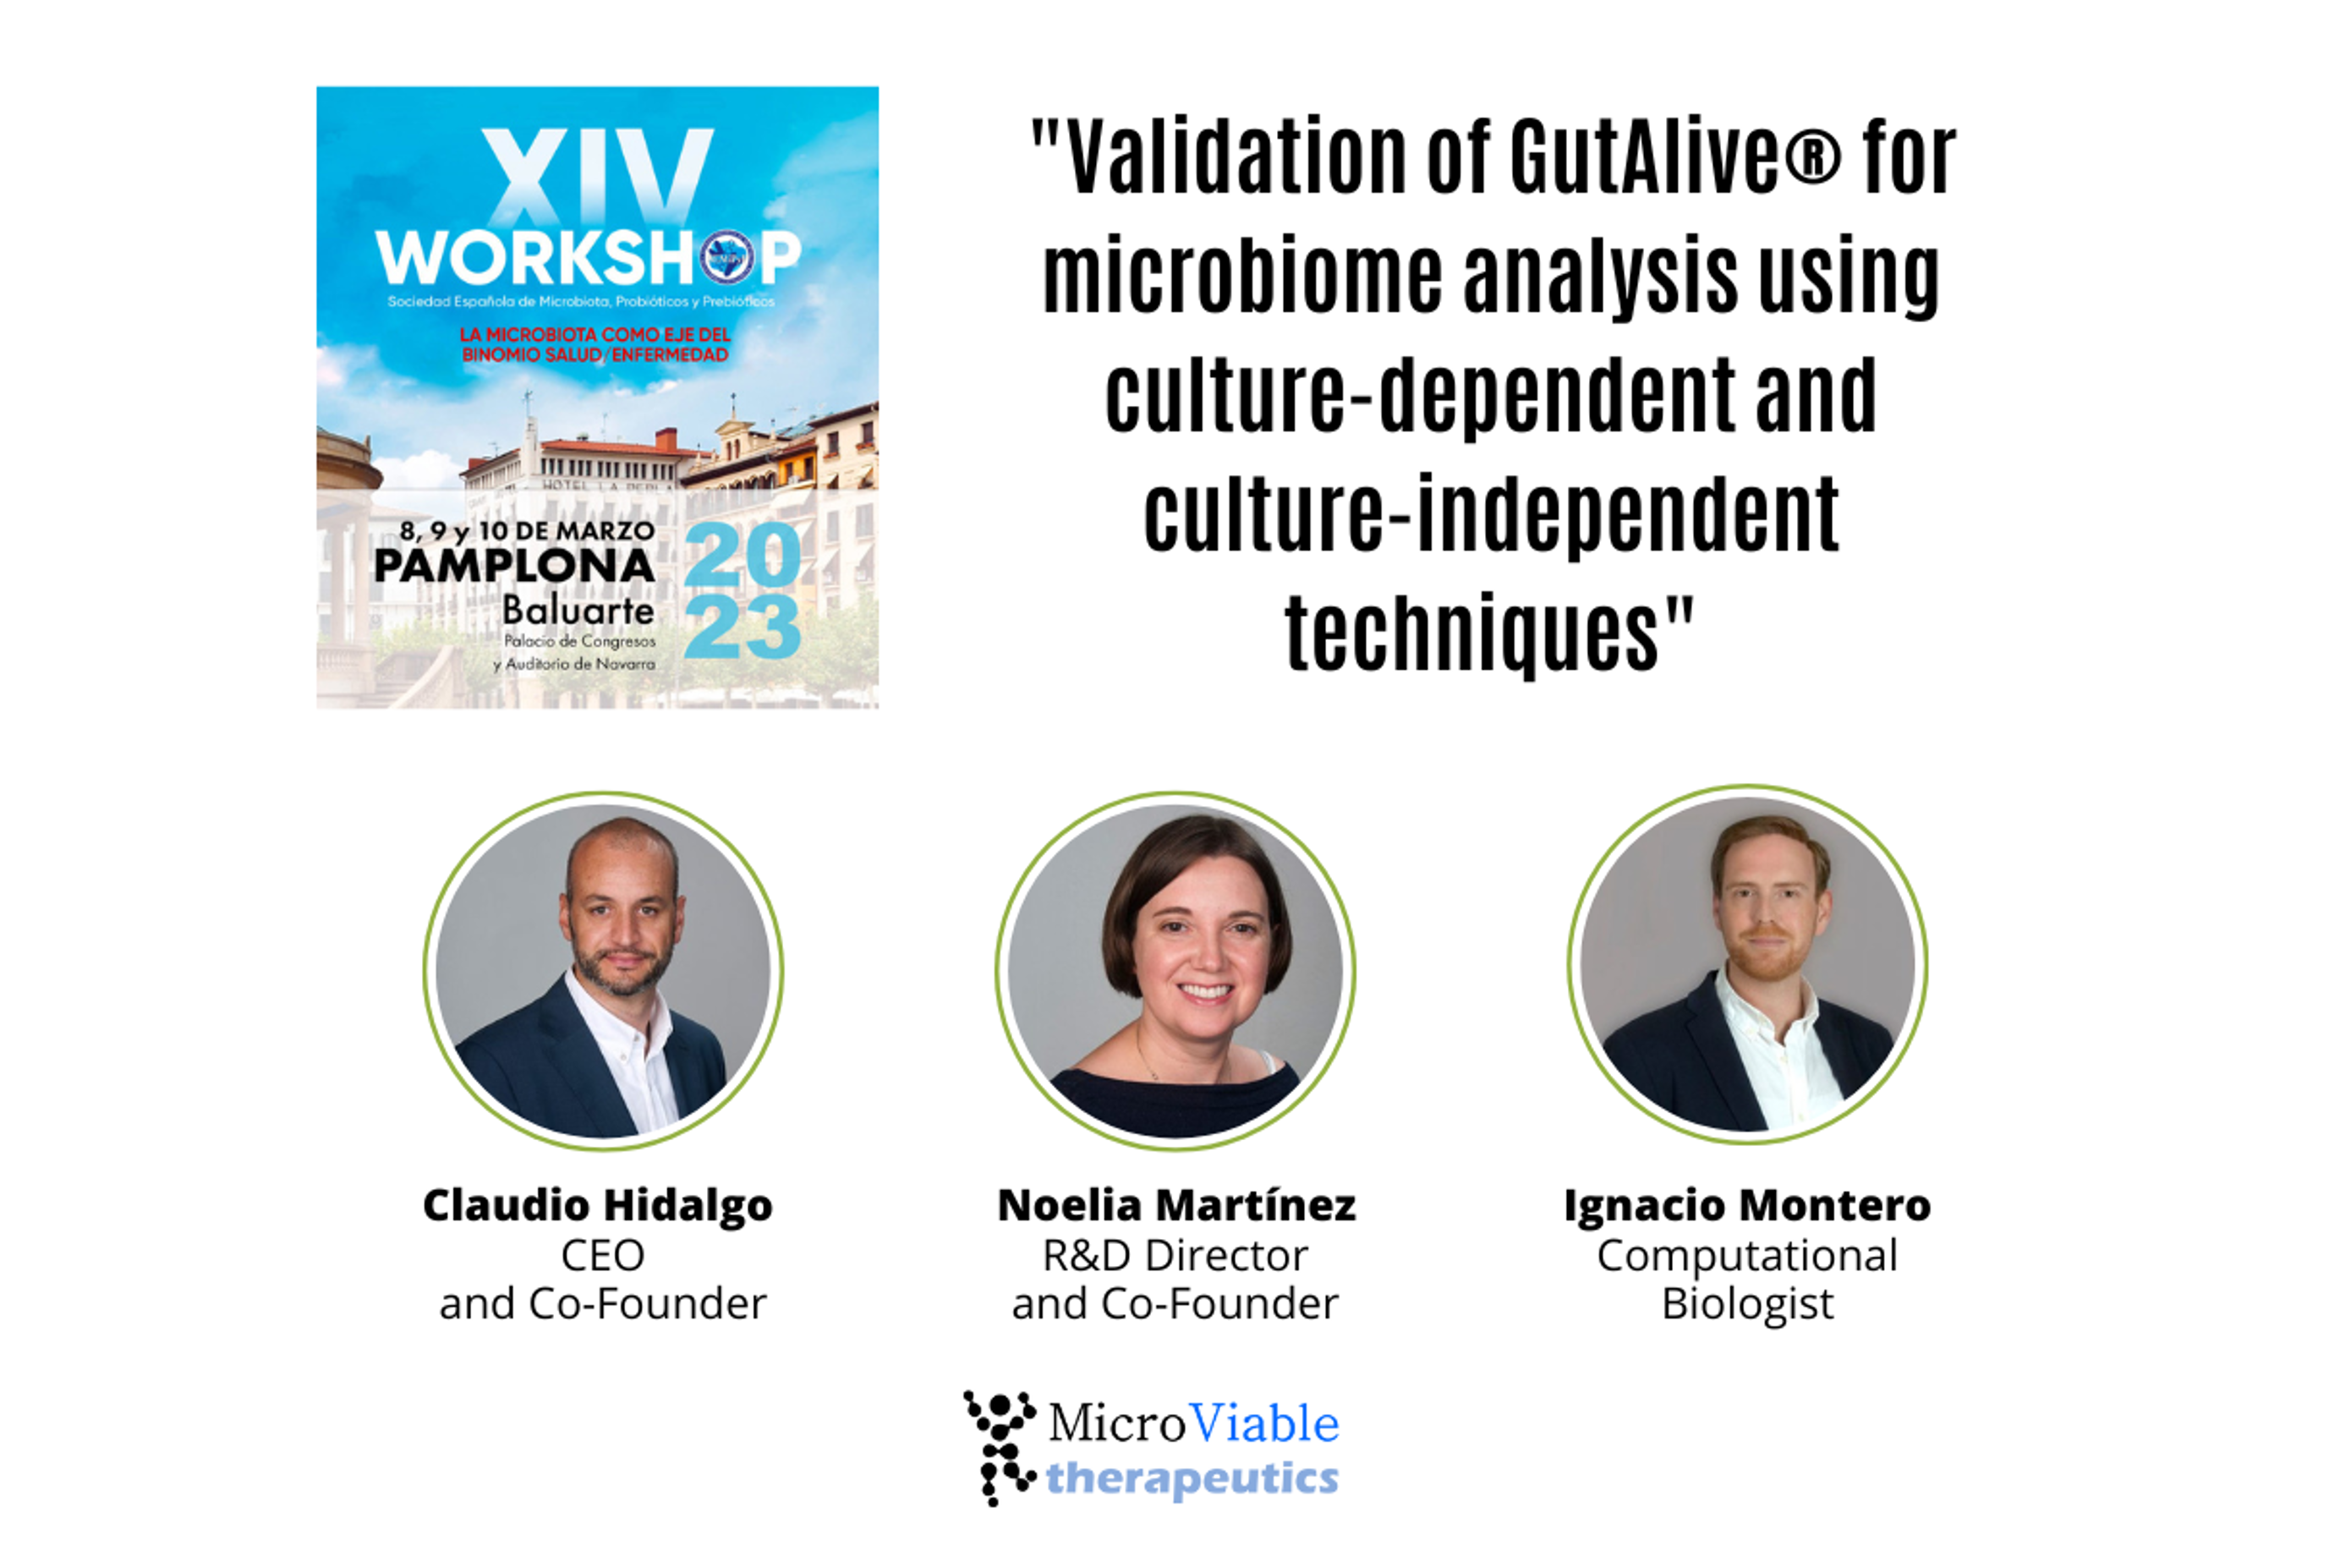 Microviable Therapeutics will be presenting at XIV Workshop of SEMiPYP